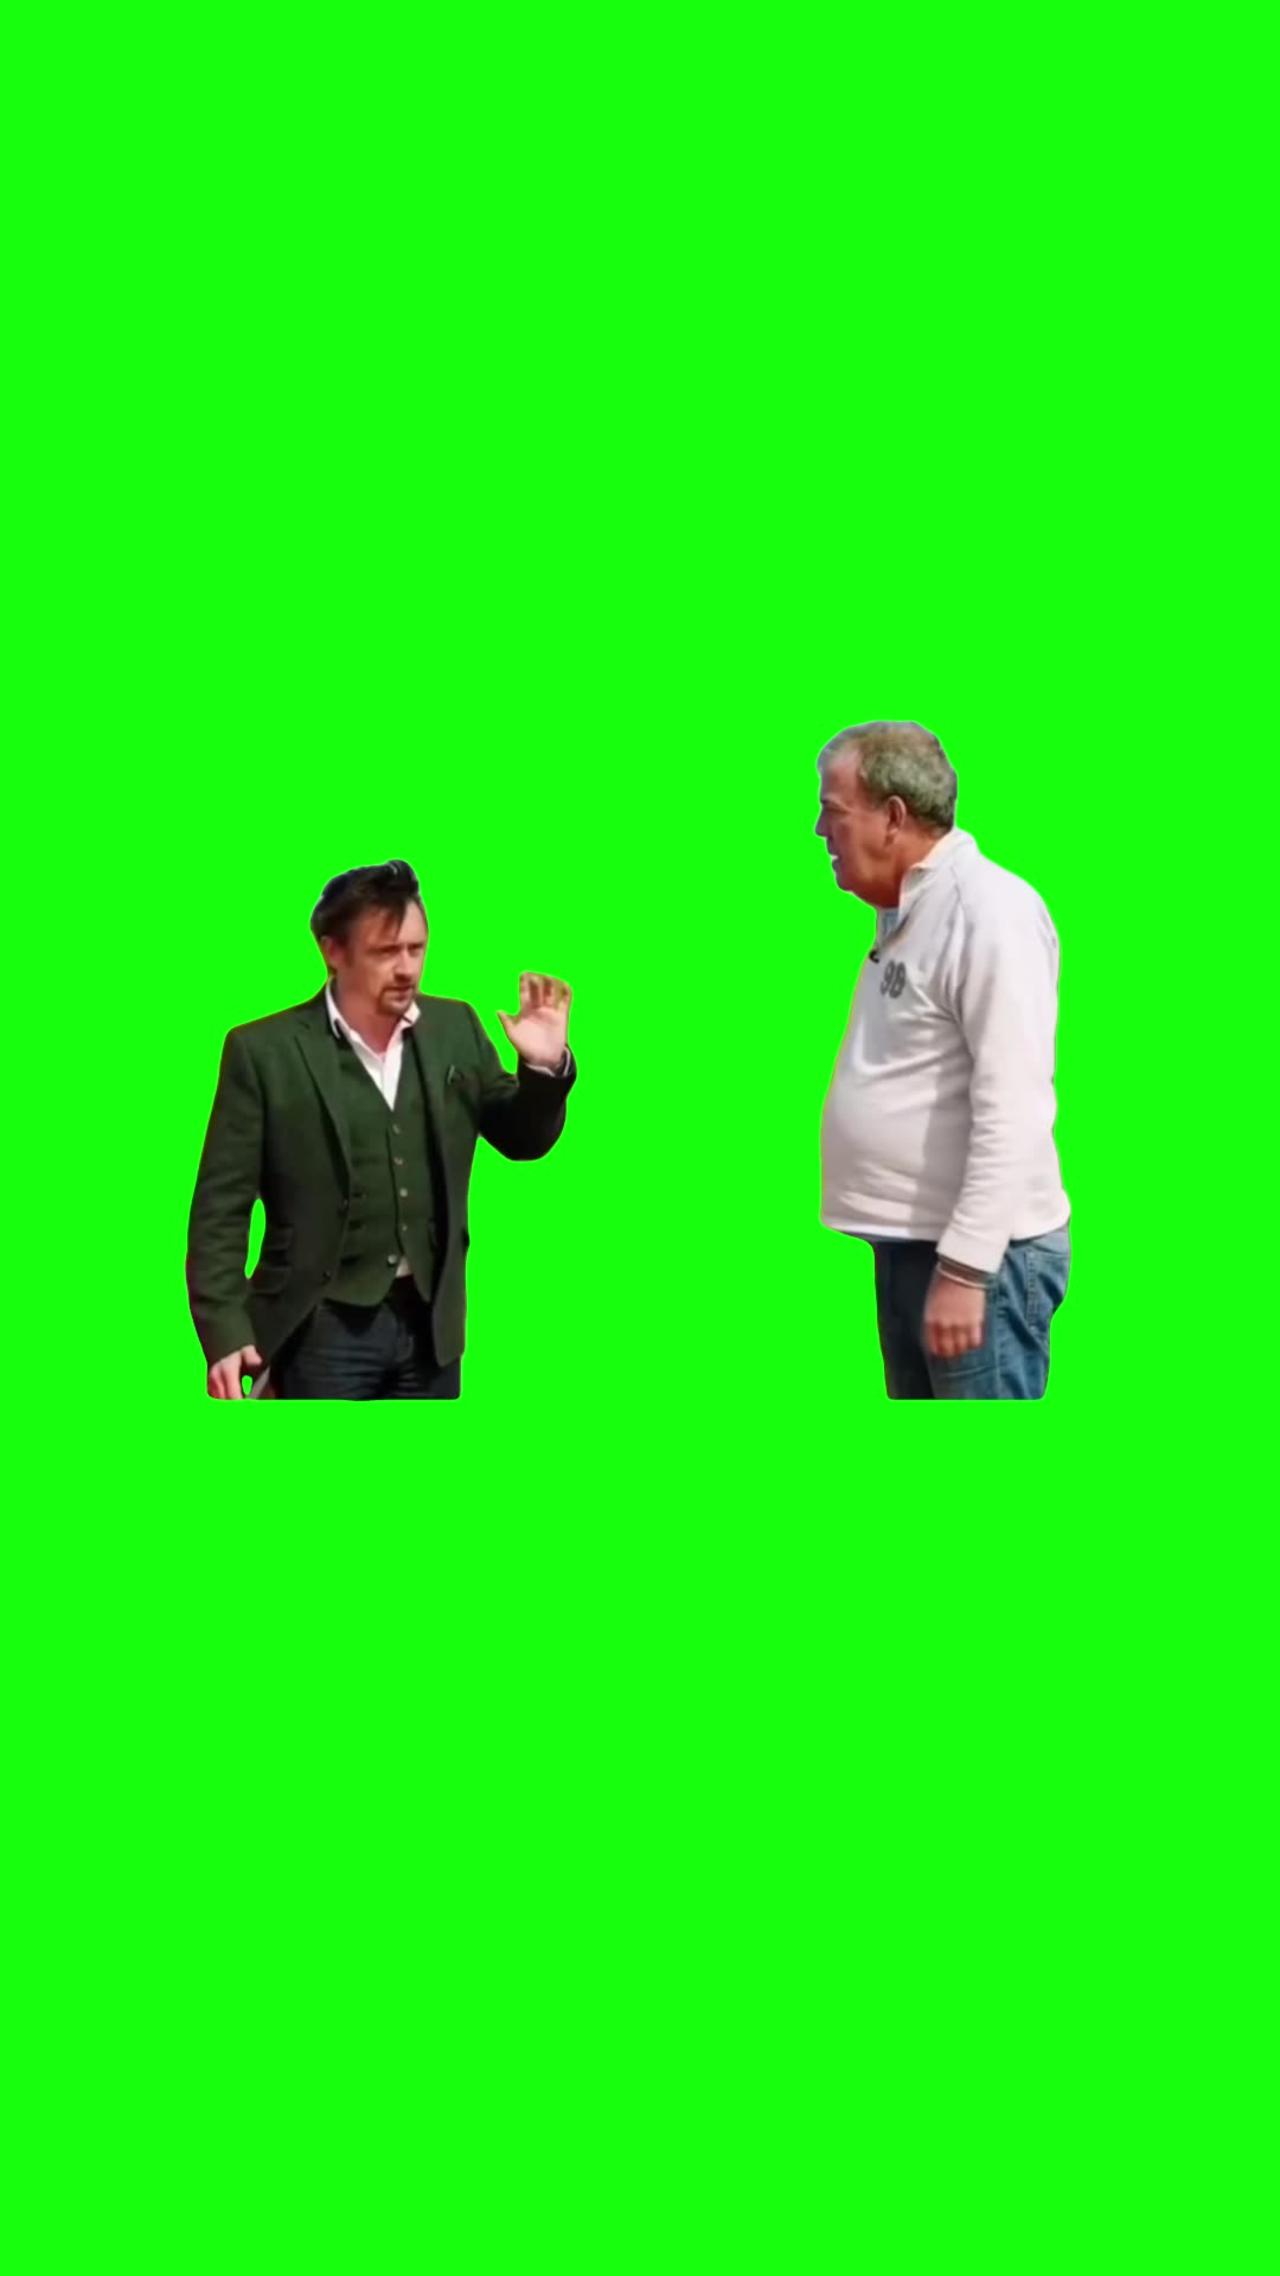 "I Don’t Want to Talk to You Anymore" Richard Hammond | Green Screen